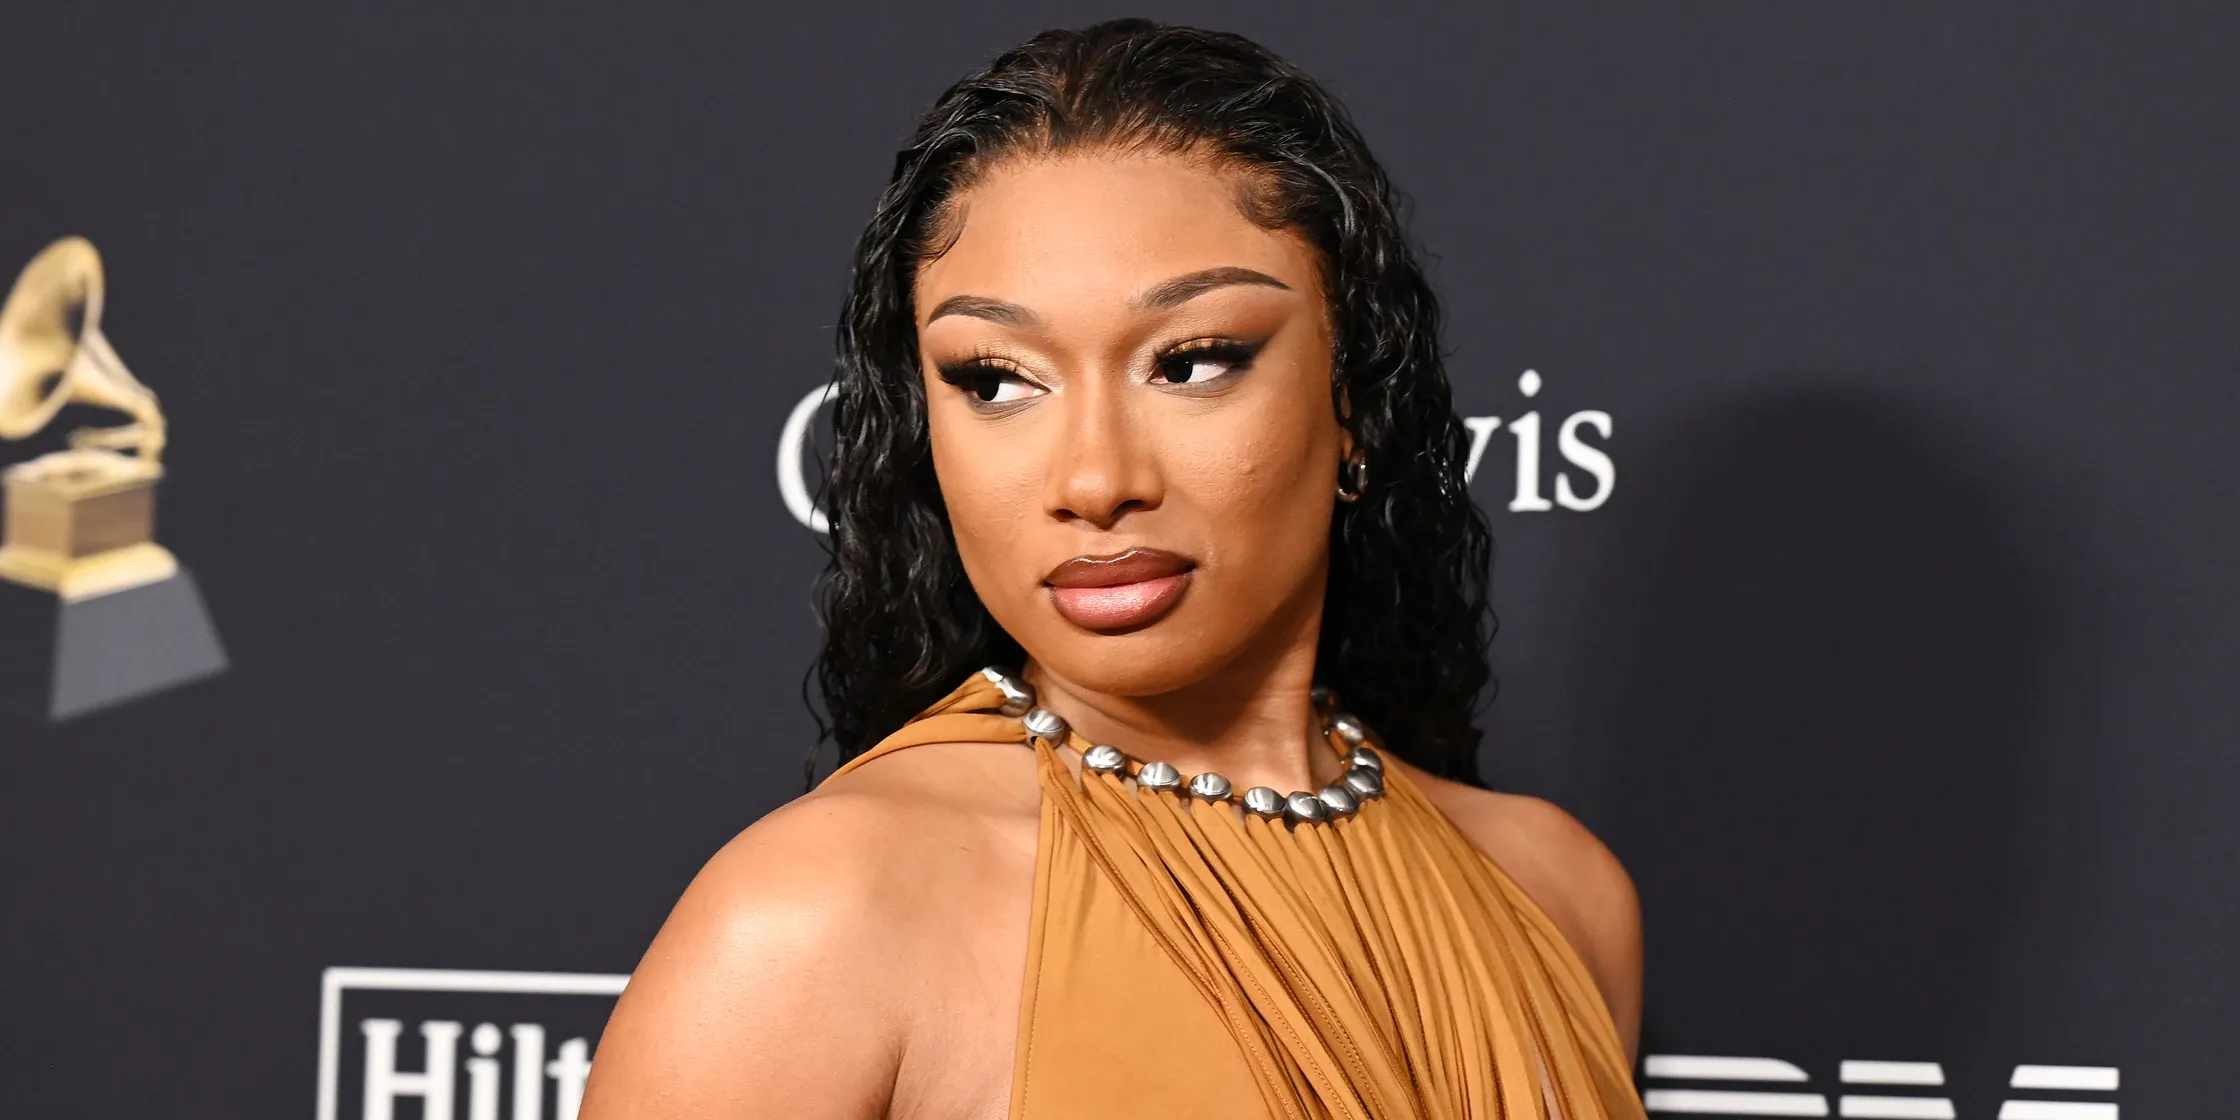 Megan Thee Stallion Sued for Harassment and Hostile Work Environment, Cameraman Alleges She Forced Him To Watch Her Have Sex